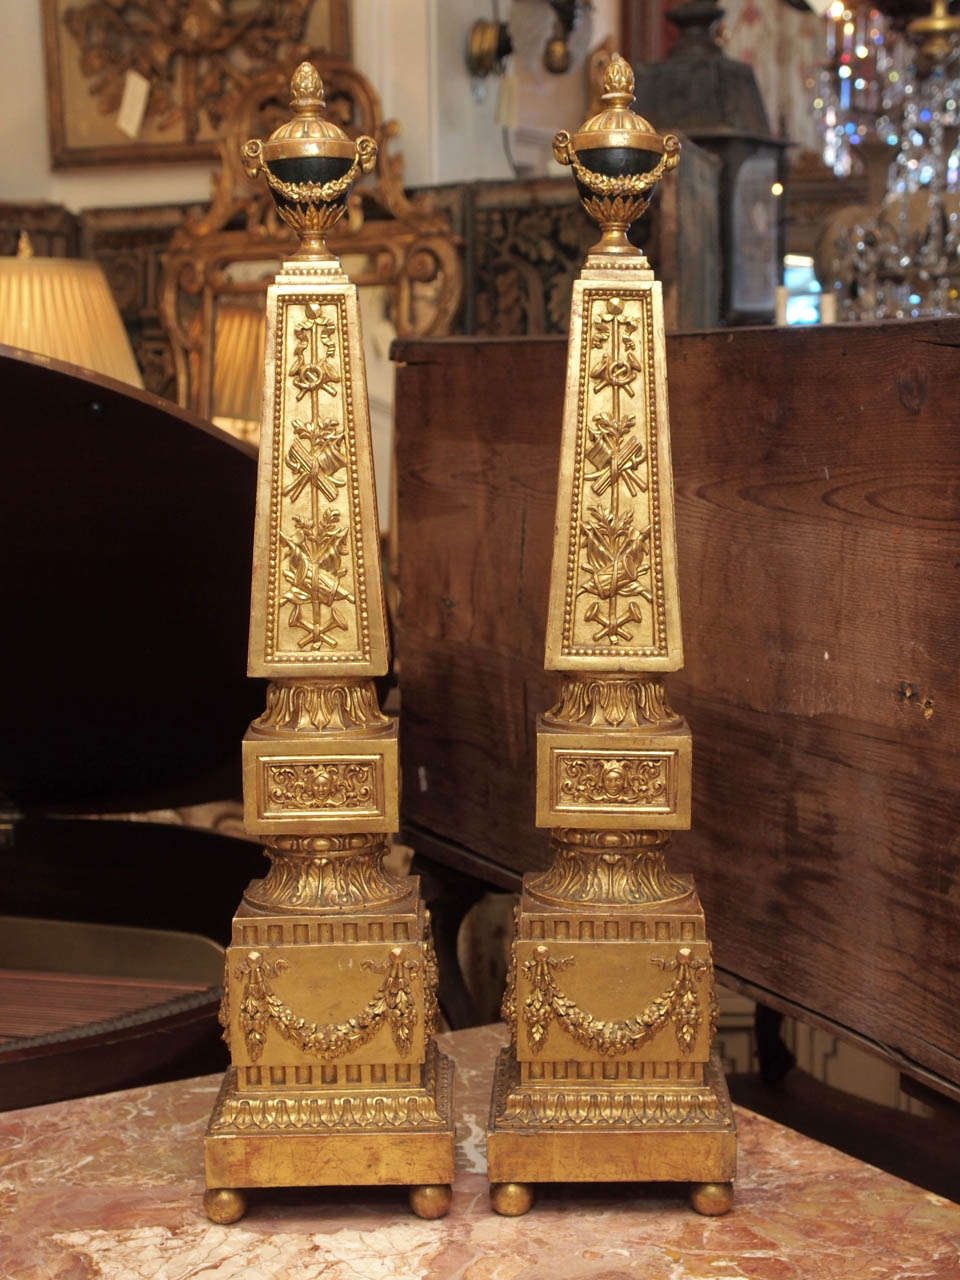 Pair of 18th c. Italian Luigi XVI Gilt Wood Decorated Obelisk with ovoid shaped finials mounted with garland and rams heads all surmounted with an acorn finial.
The obelisk decorated with carved war related musical instruments and foliate